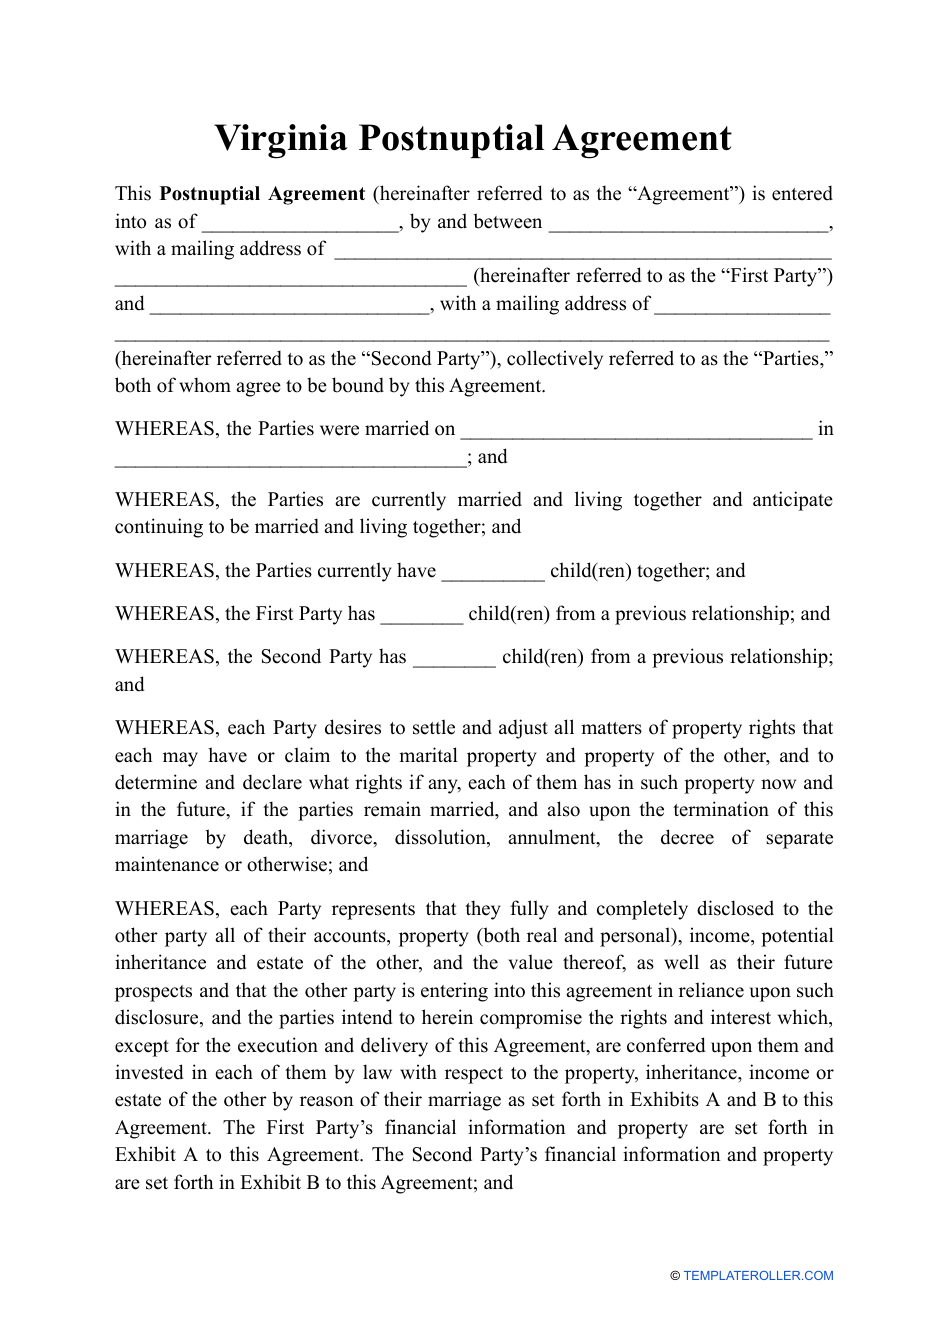 Postnuptial Agreement Template - Virginia, Page 1